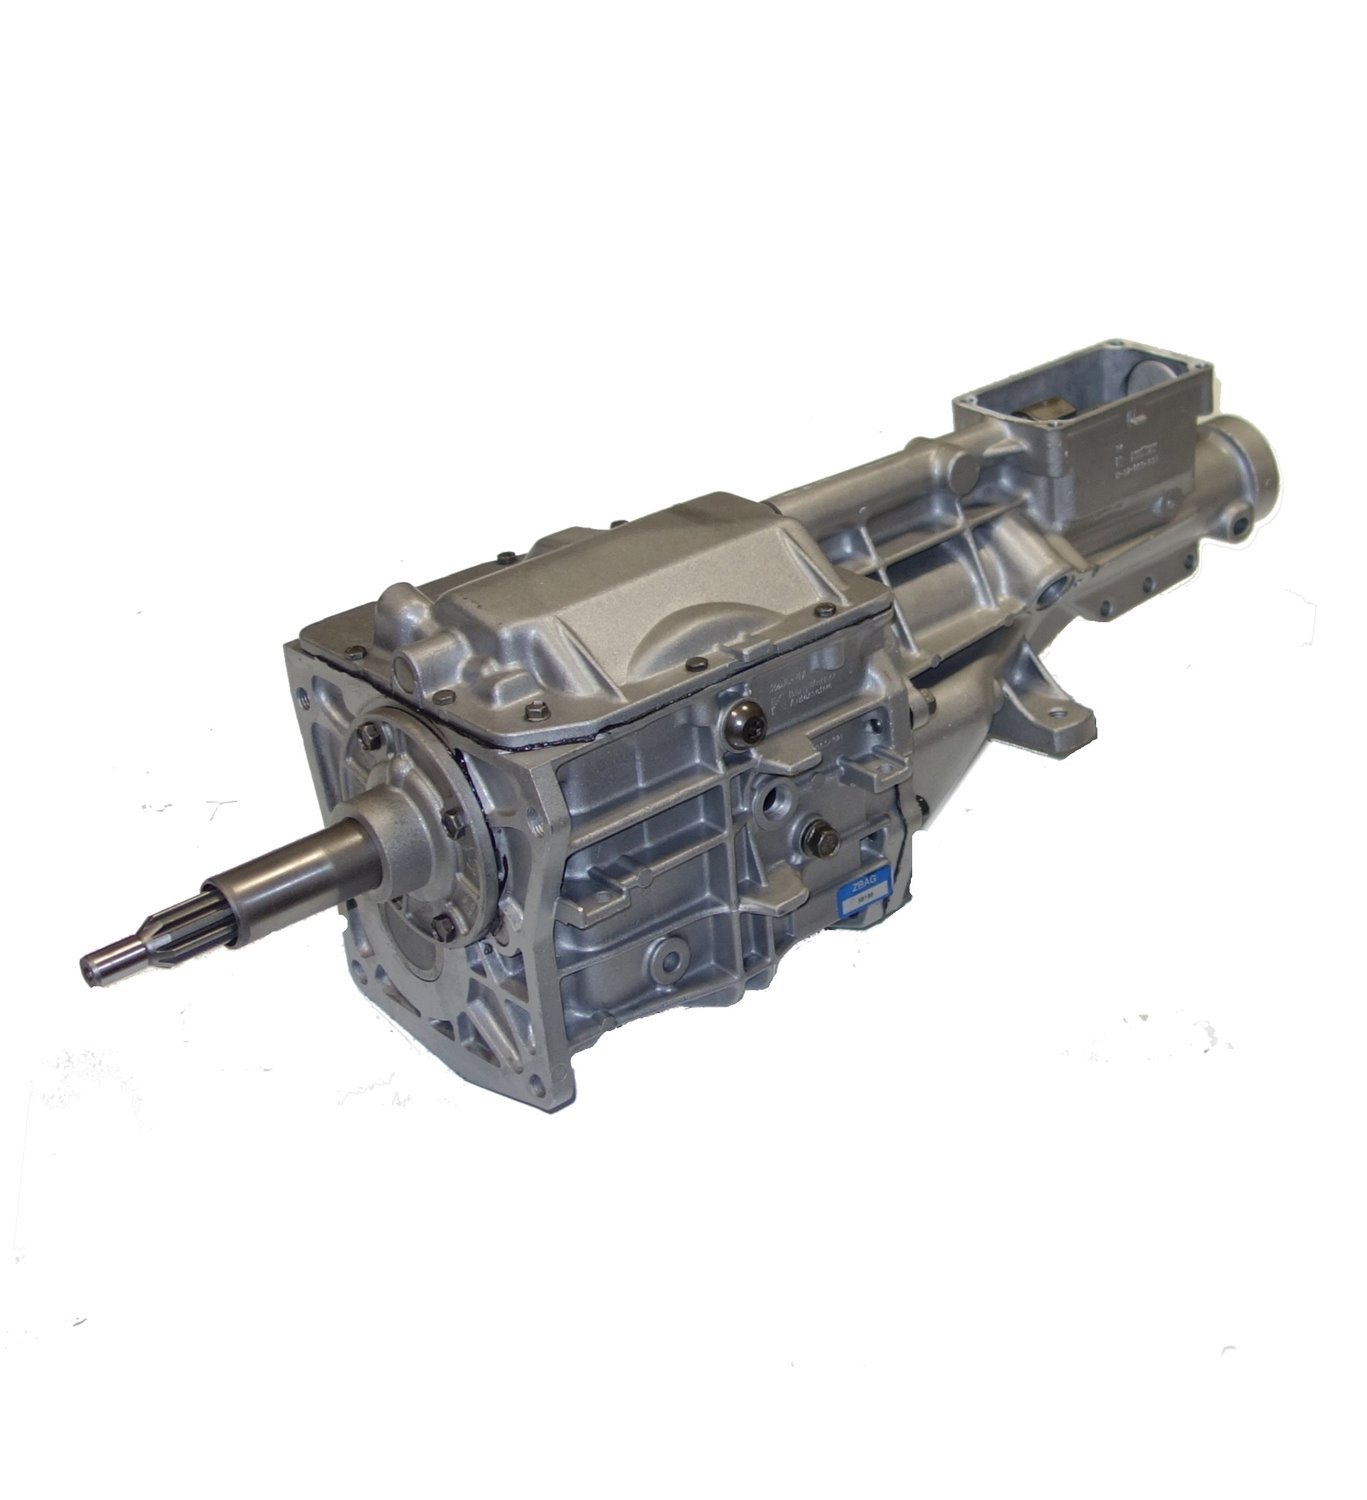 Remanufactured T5 Manual Transmission for Ford 85-86 Mustang,